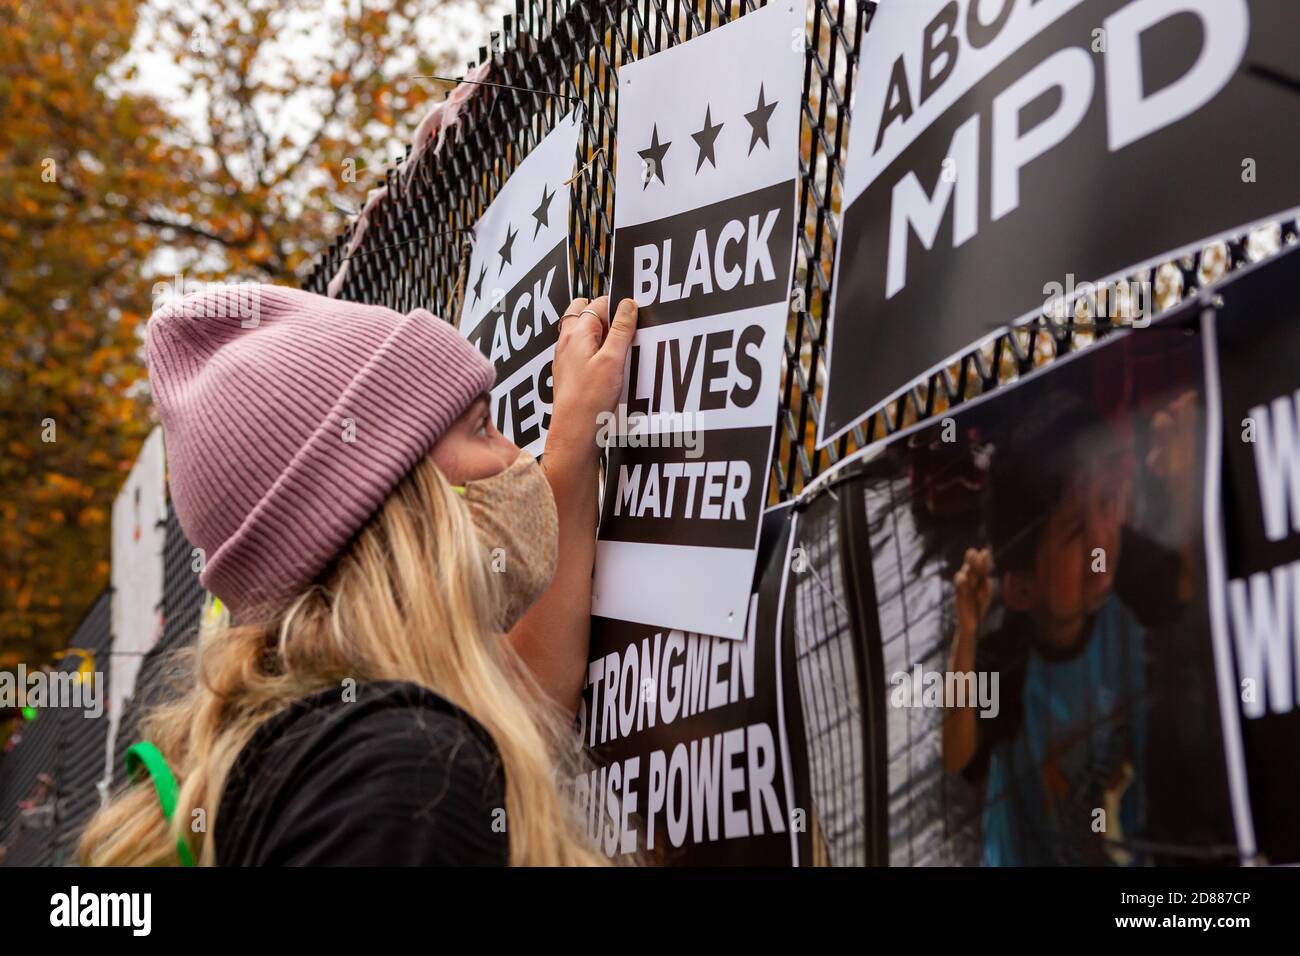 Washington, DC, USA, 27 October, 2020.  Pictured: A woman hangs a Black Lives Matter sign on the Lafayette Square fence during at an event to redecorate the fence with protest art.  Trump supporters destroyed the exist art the night of October 26, 2020, as DC police officers watched.  The fence has been covered with protest art since it went up during protests after George Floyd's death. Credit: Allison Bailey/Alamy Live News Stock Photo